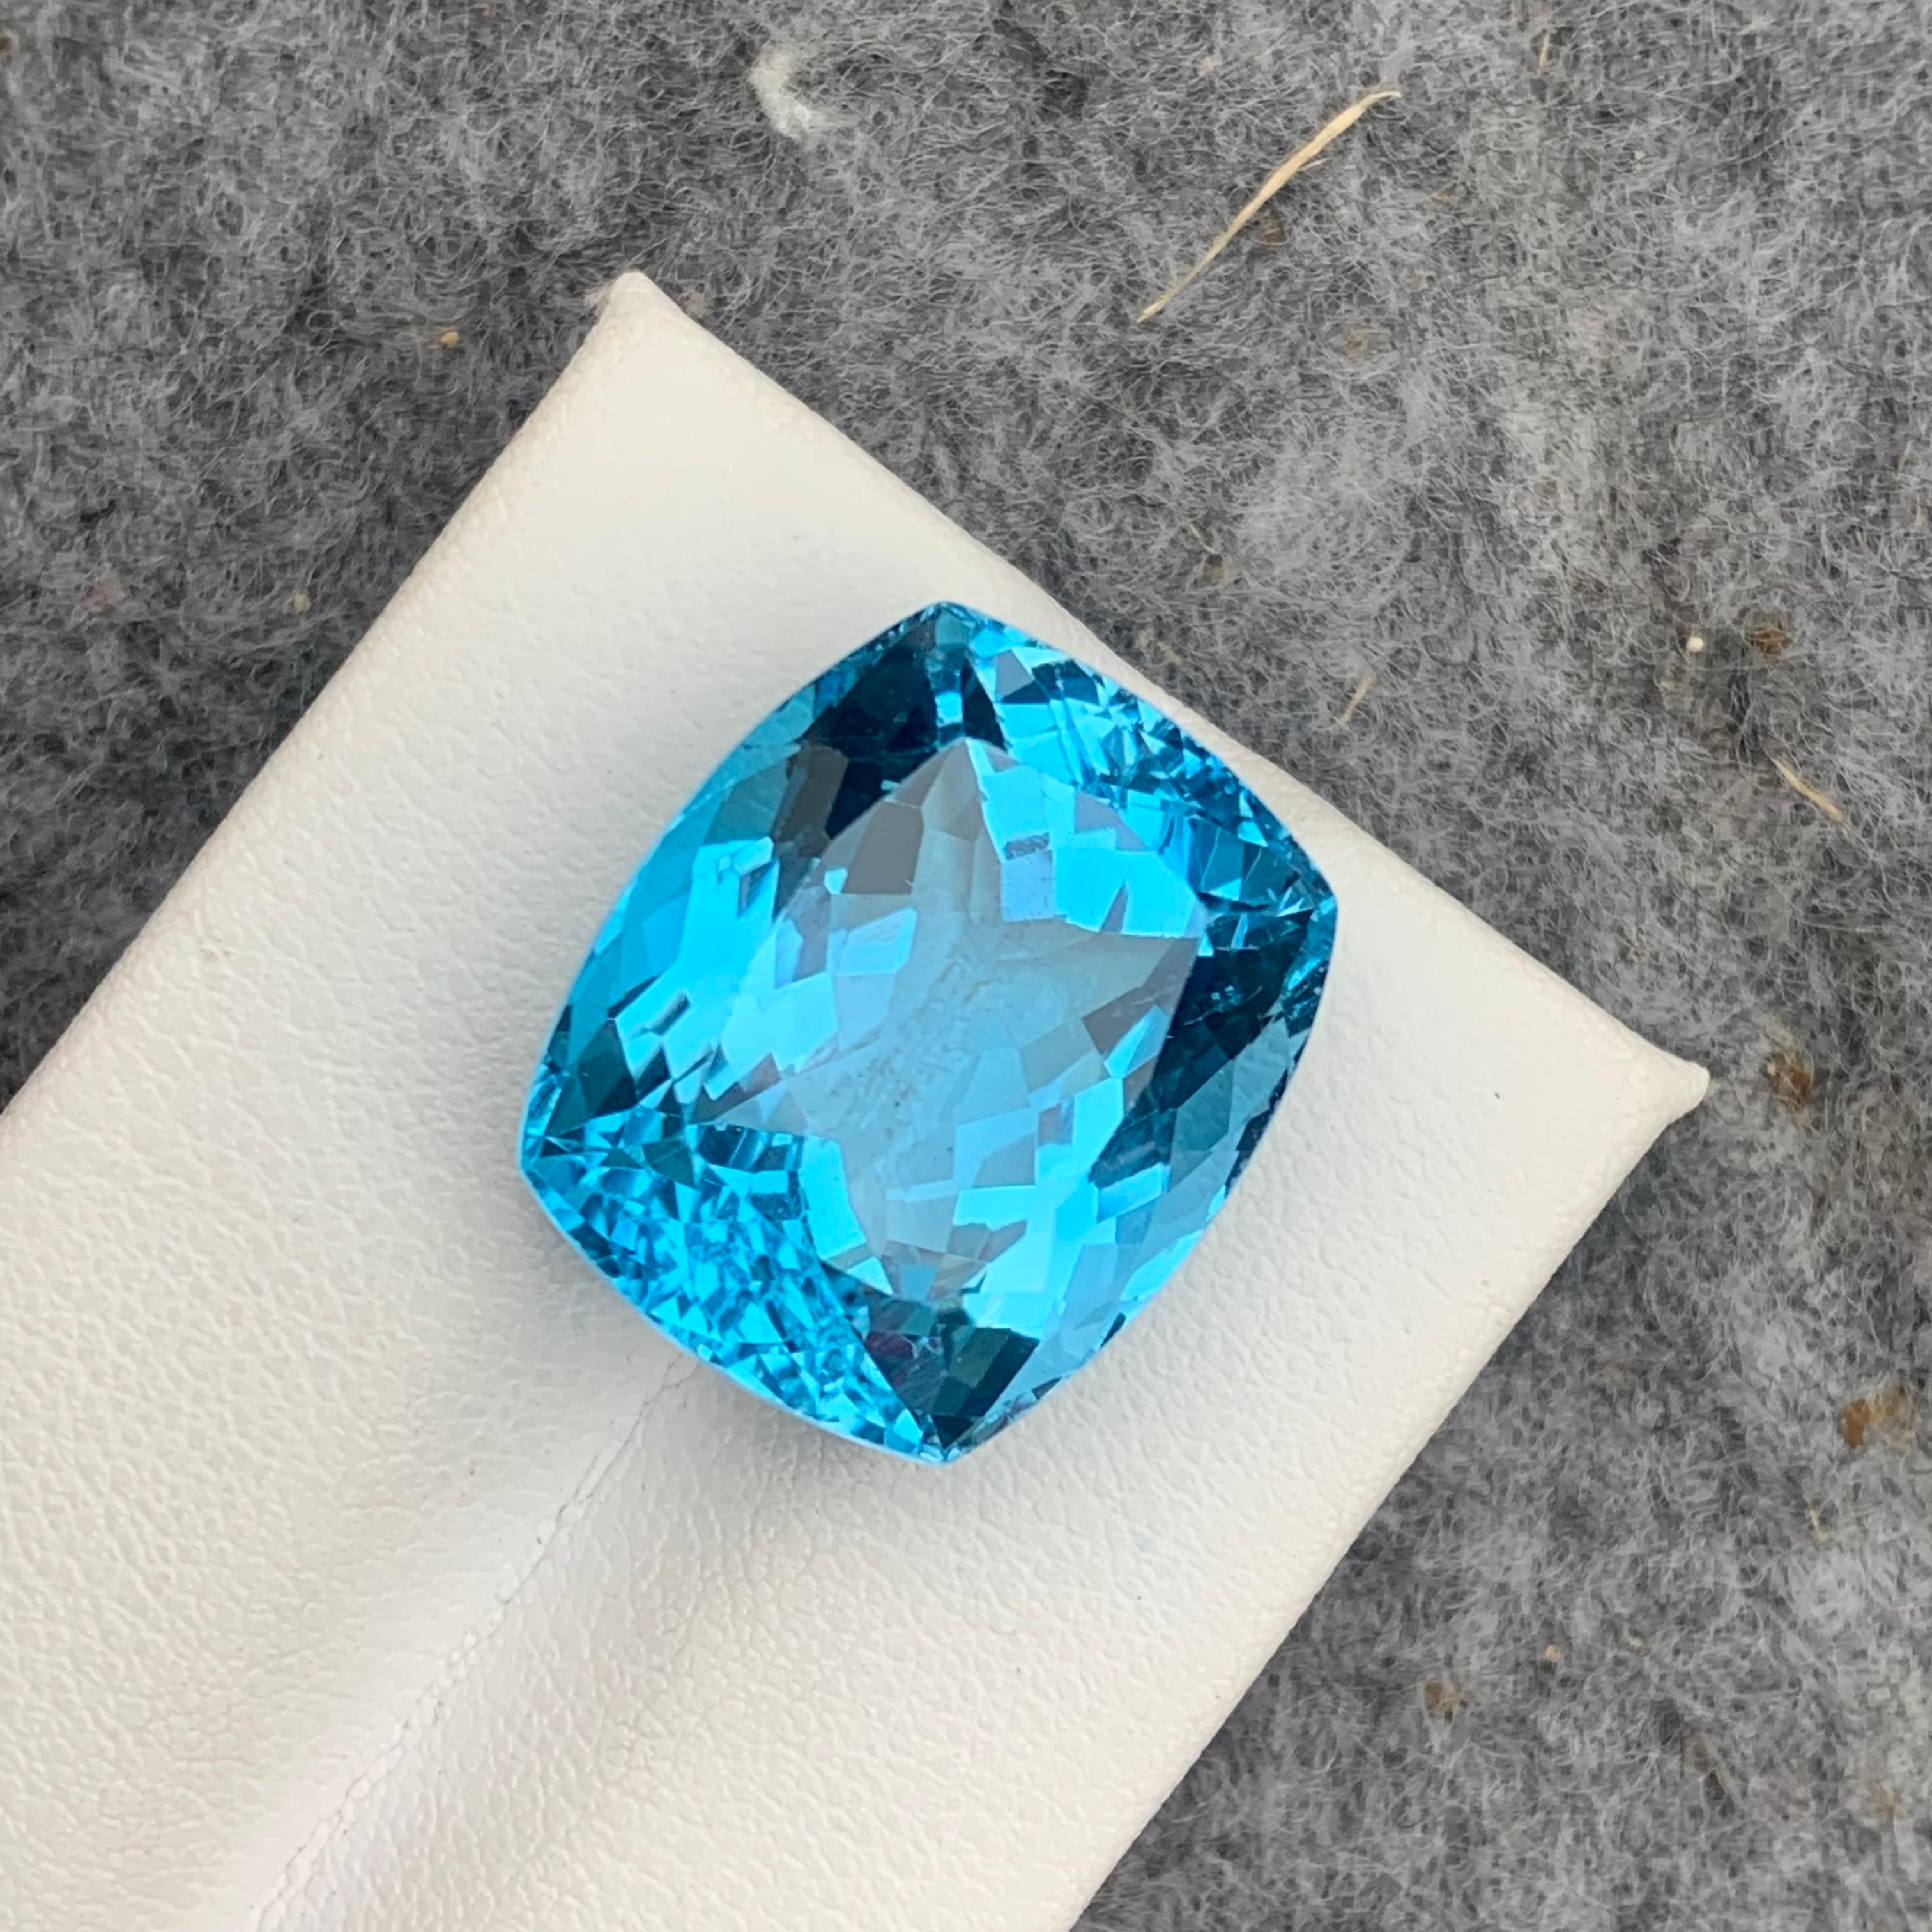 Gorgeous 31.10 Carat Loose Blue Topaz from Brazil Long Cushion Cut for Jewelry For Sale 4